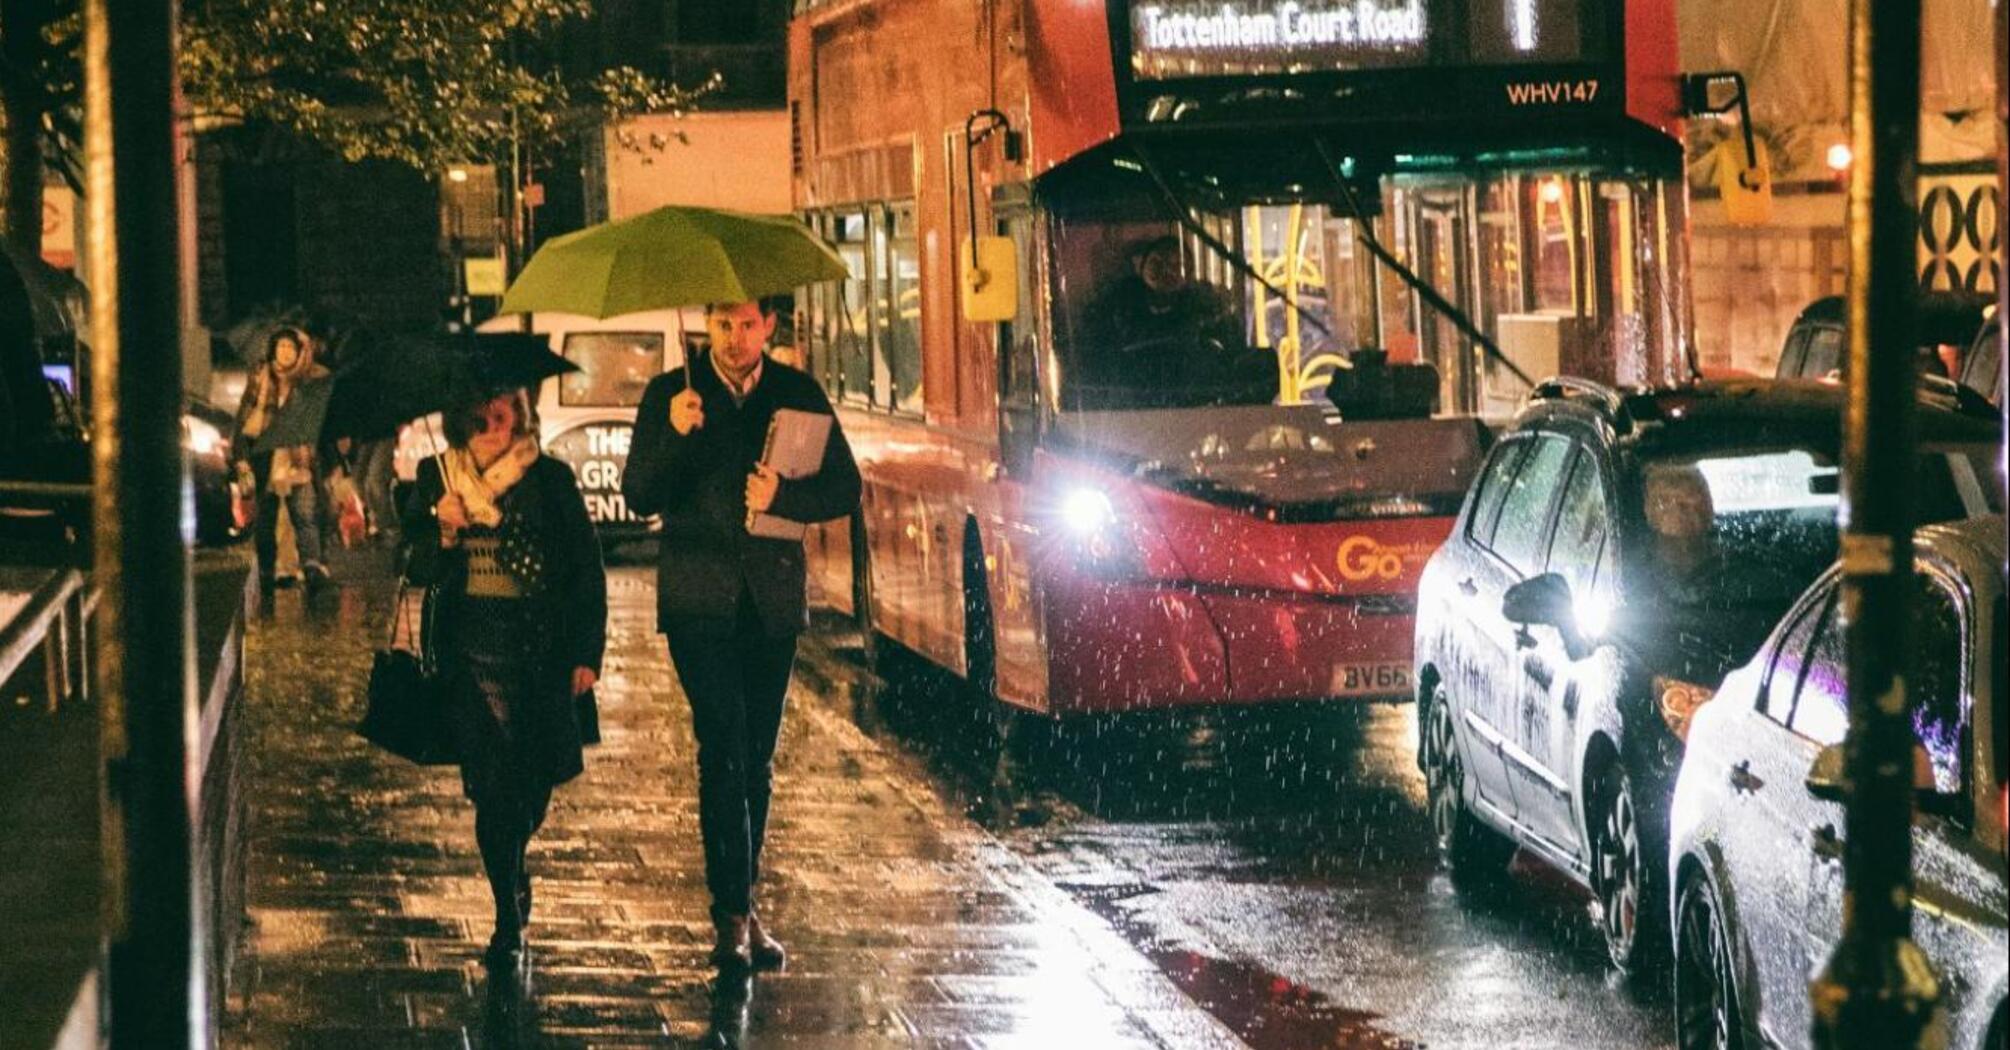 People walking with umbrellas on a rainy night near a bus stop with a red double-decker bus in the background